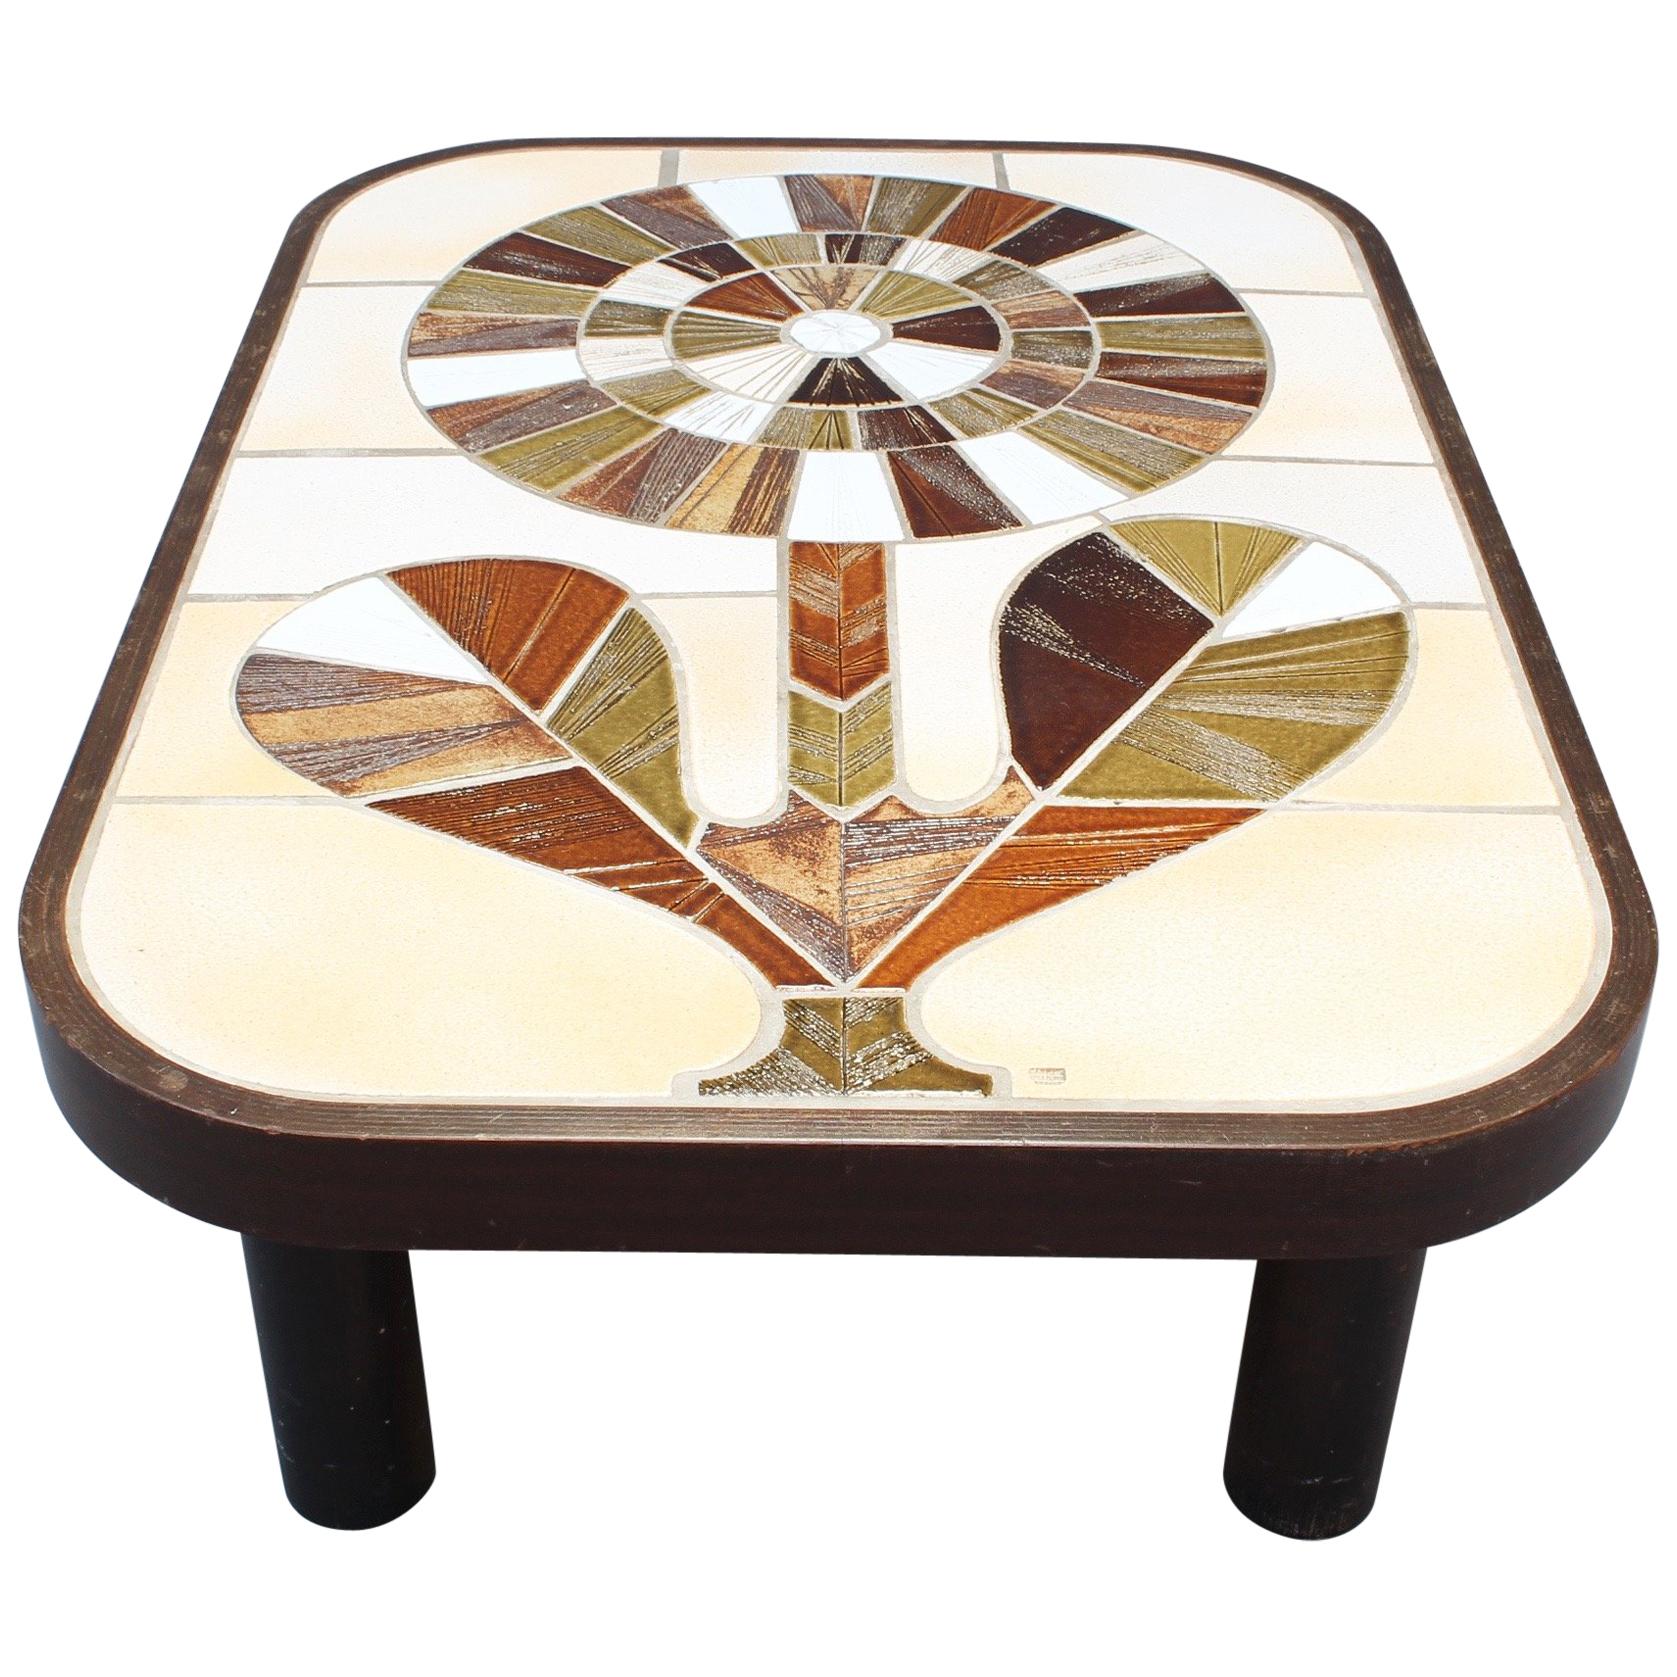 Ceramic Tiled Coffee Table by Roger Capron, circa 1970s